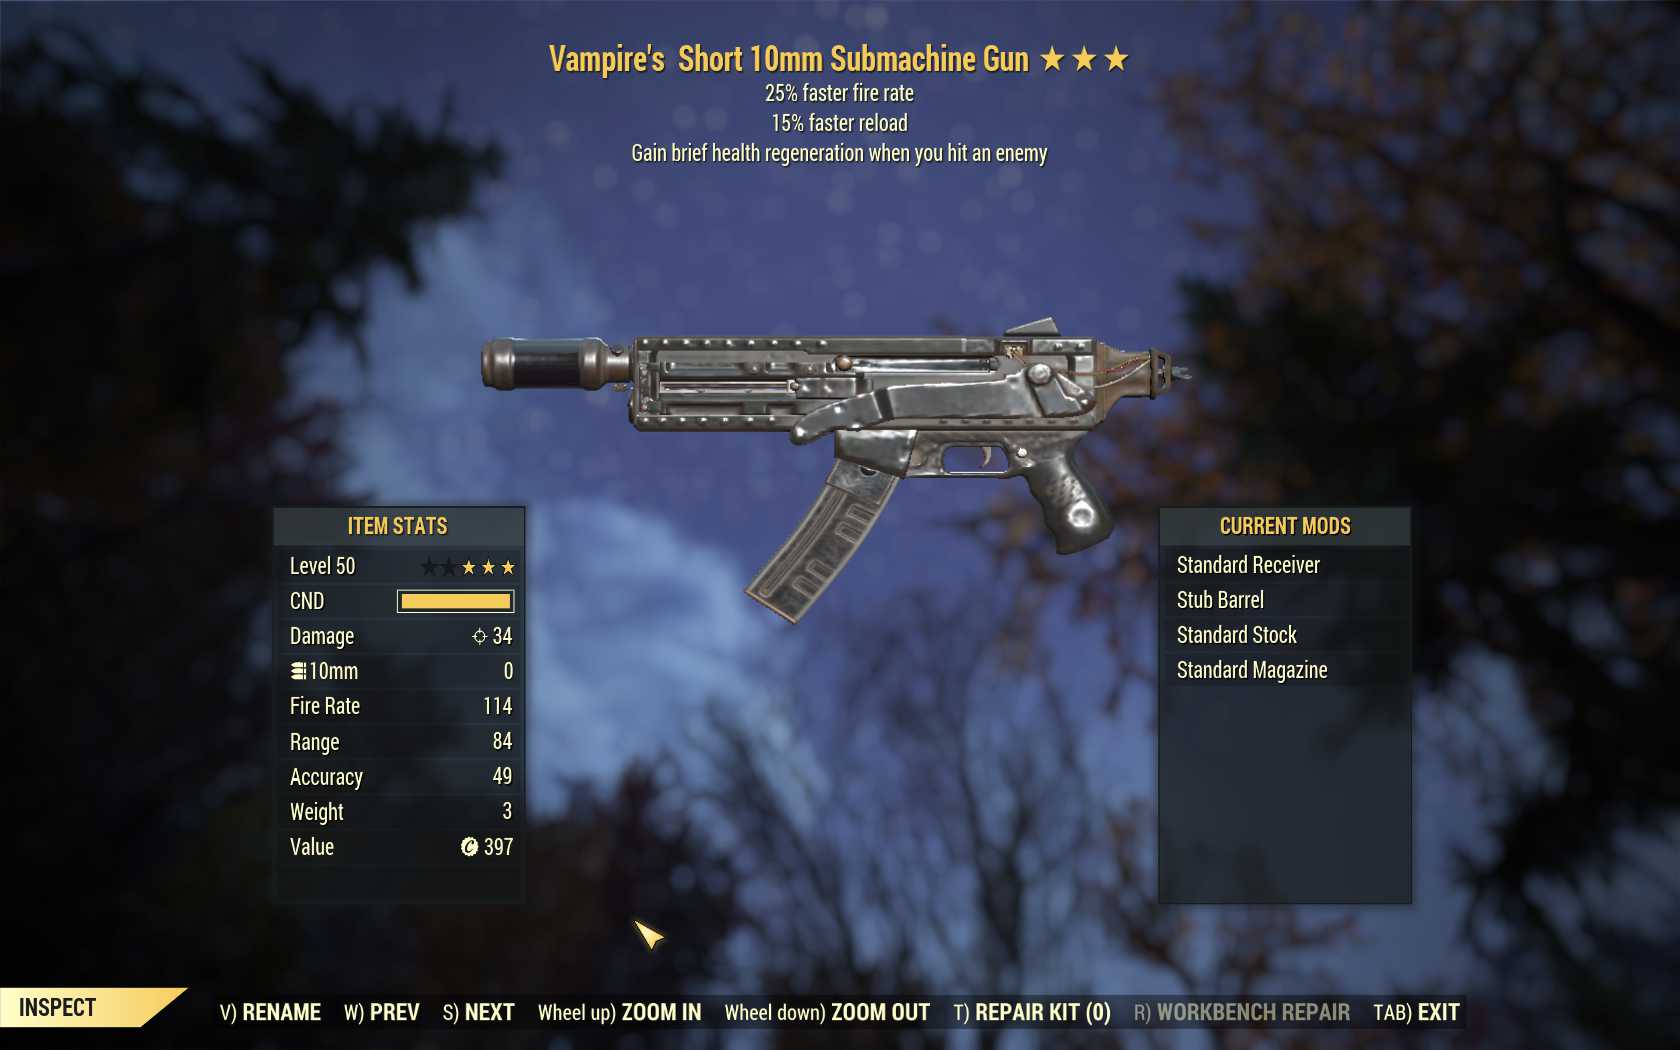 Vampire's 10mm Submachine Gun (25% faster fire rate, 15% faster reload)